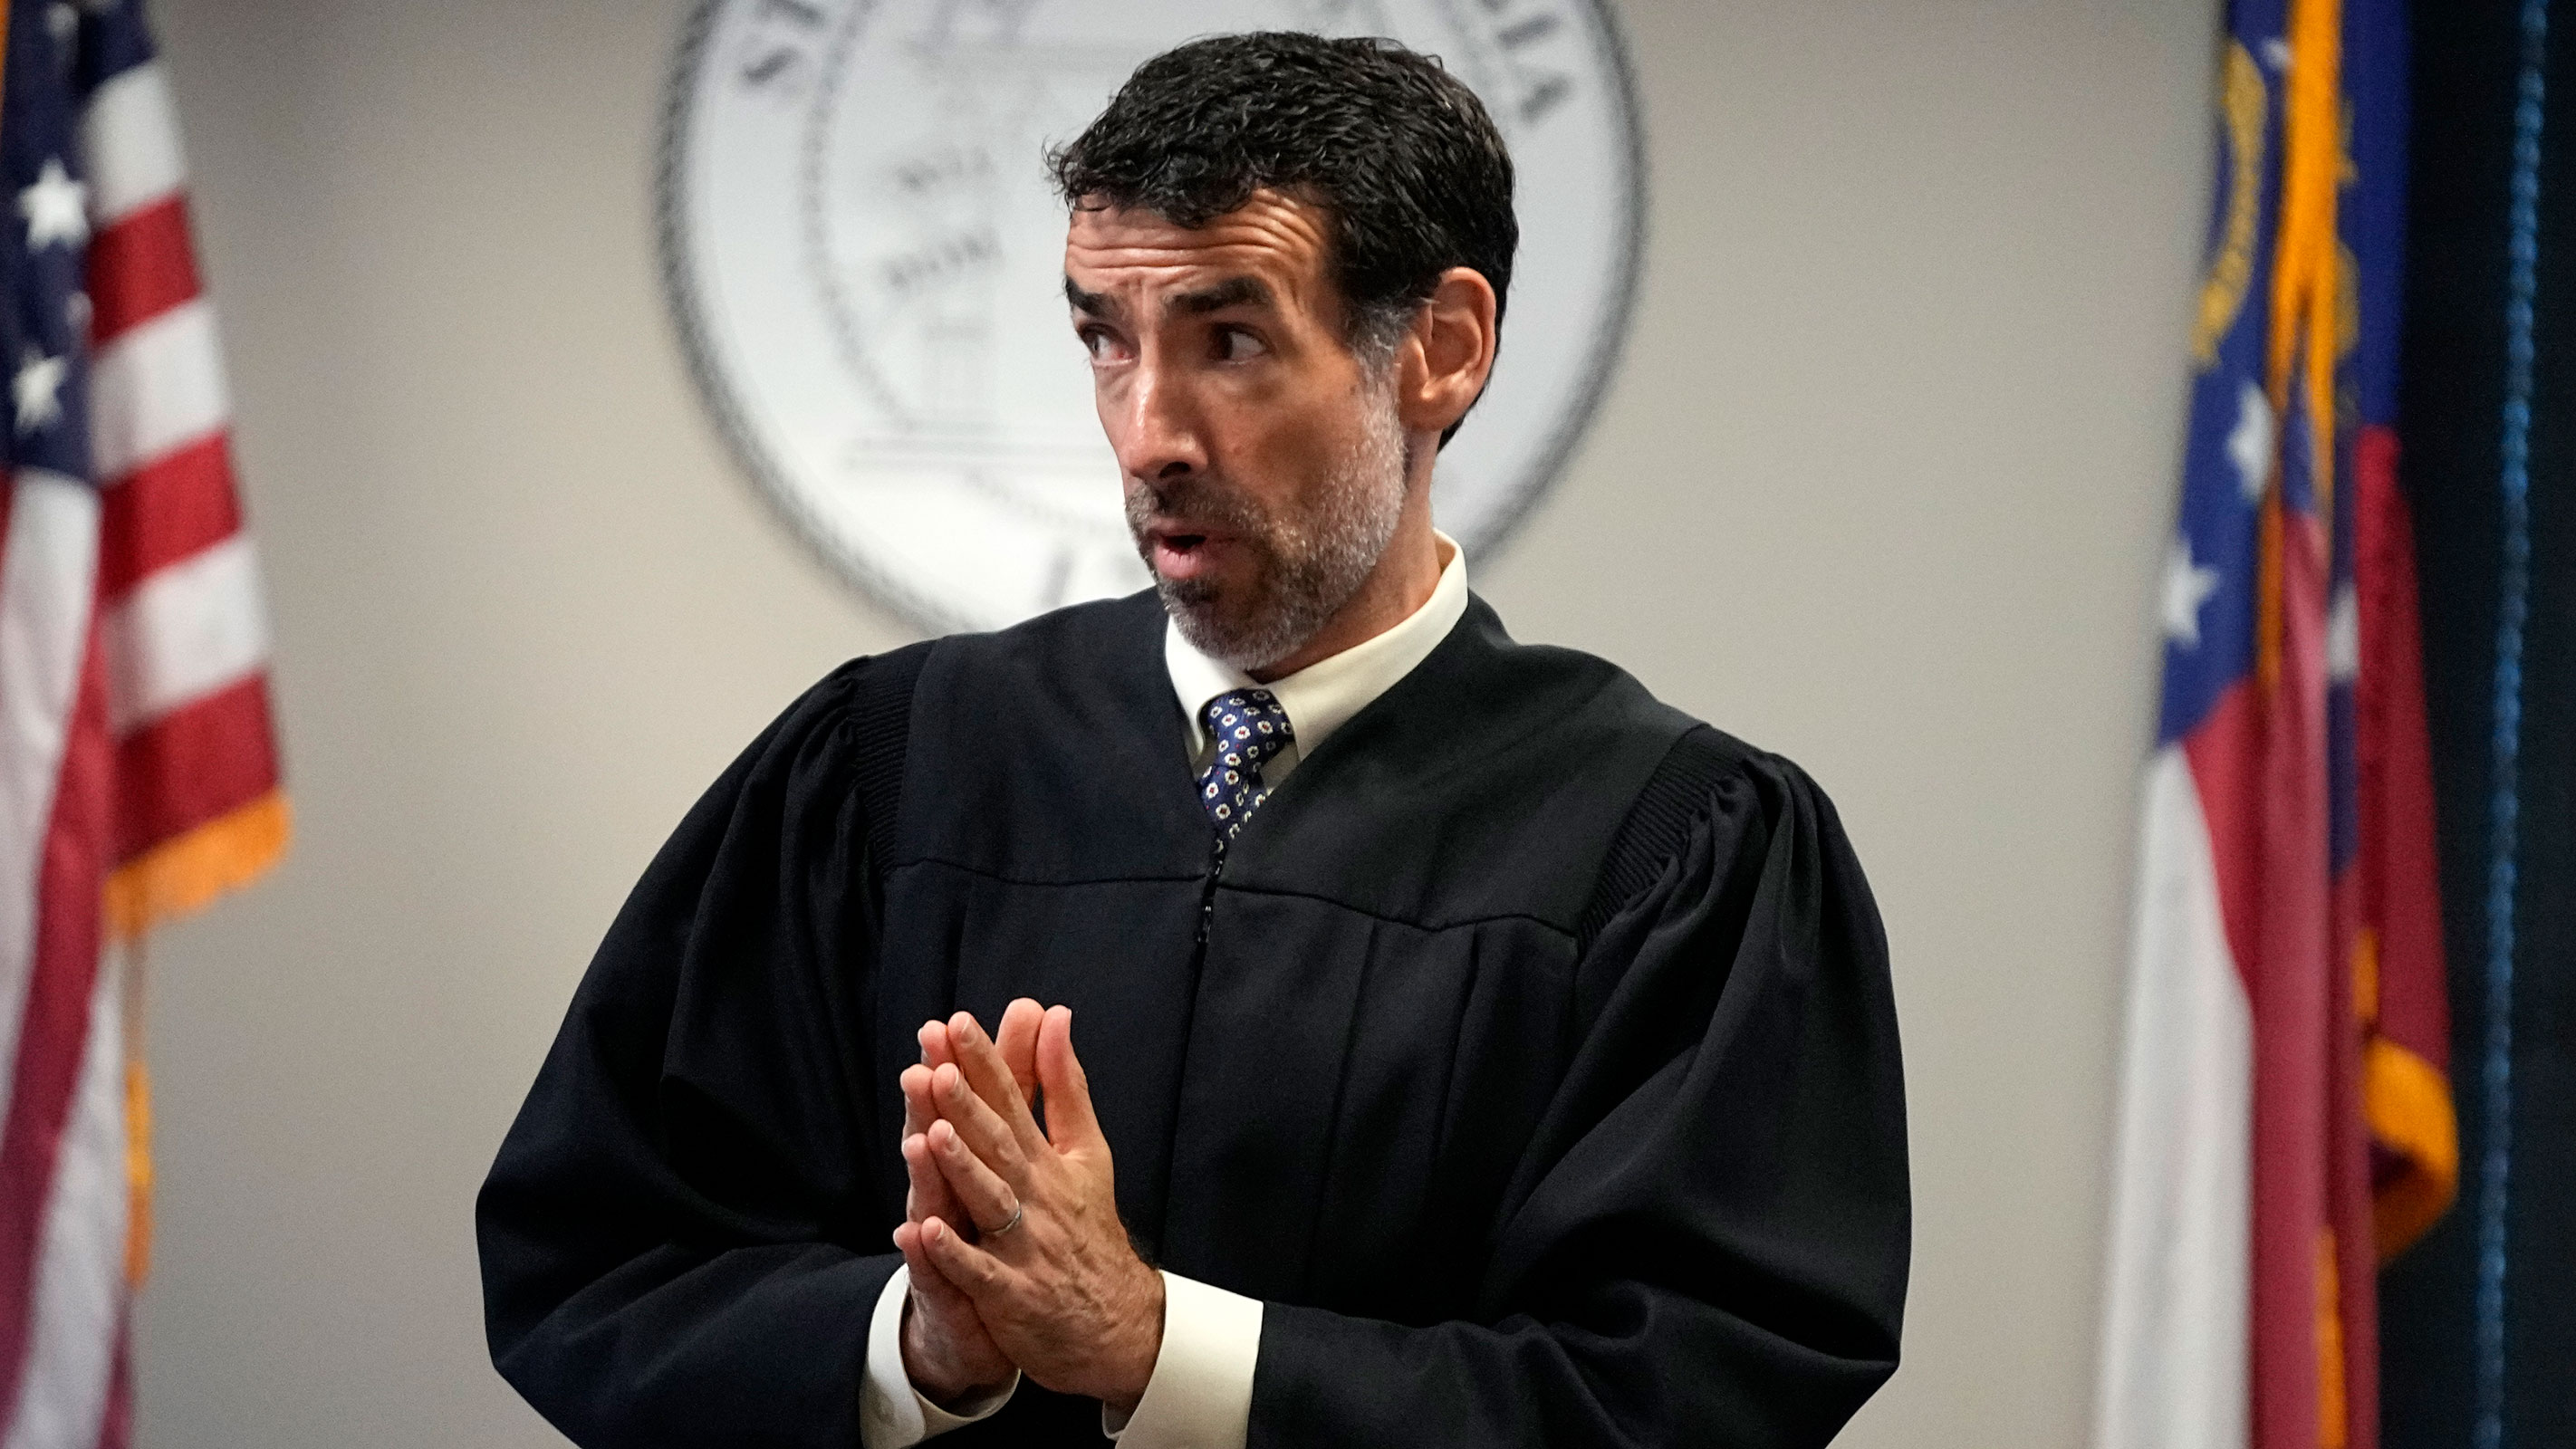 Judge presiding over Fulton County grand jury says he expects to stay